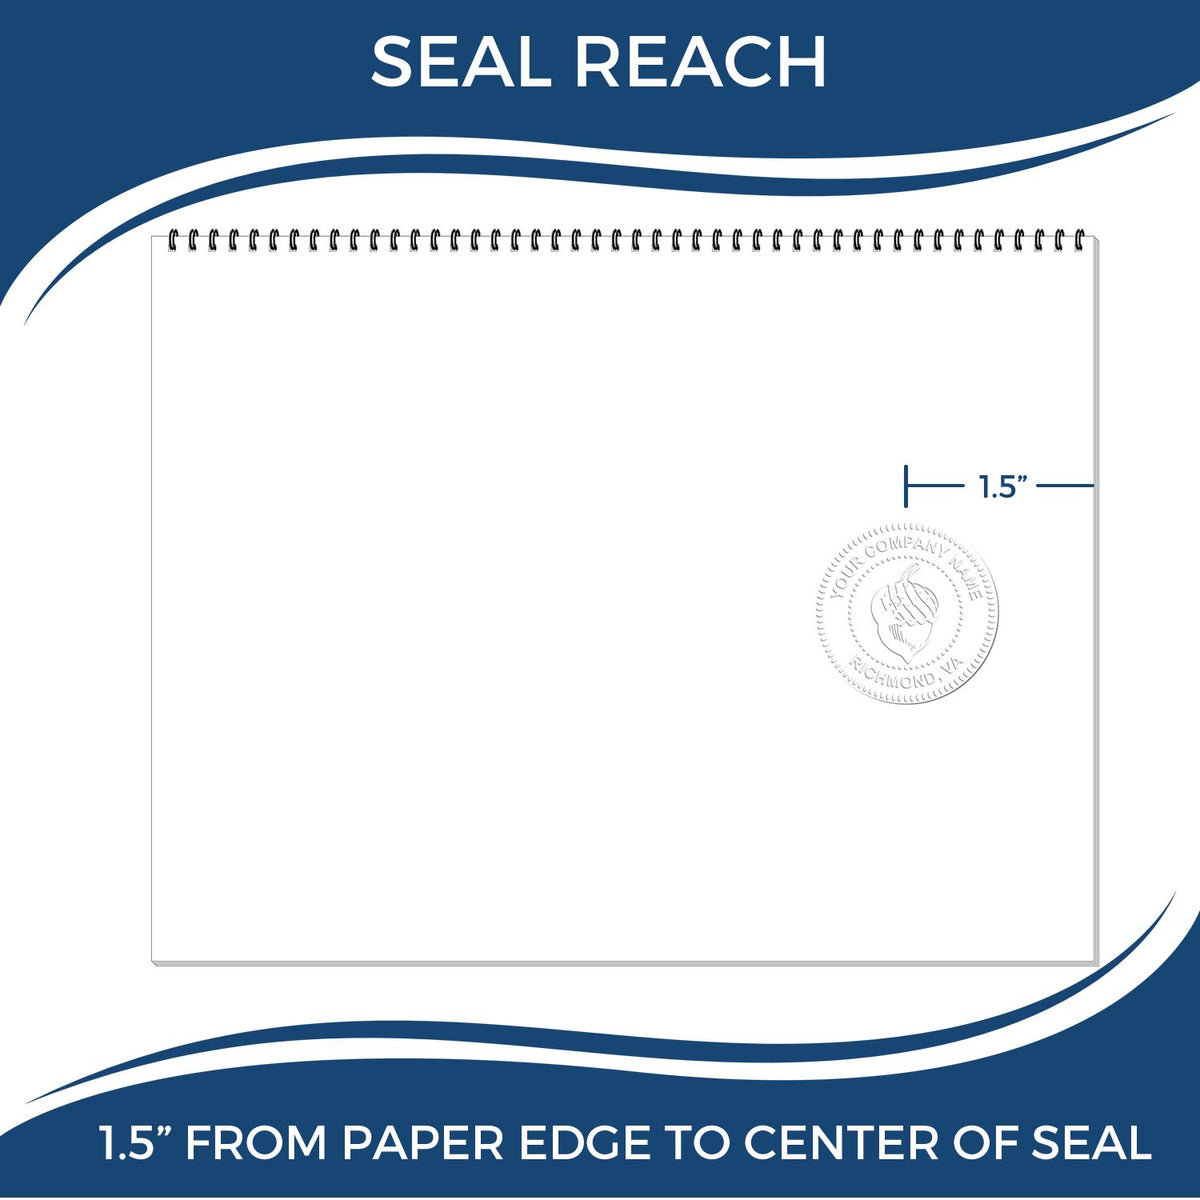 An infographic showing the seal reach which is represented by a ruler and a miniature seal image of the Gift Pennsylvania Geologist Seal